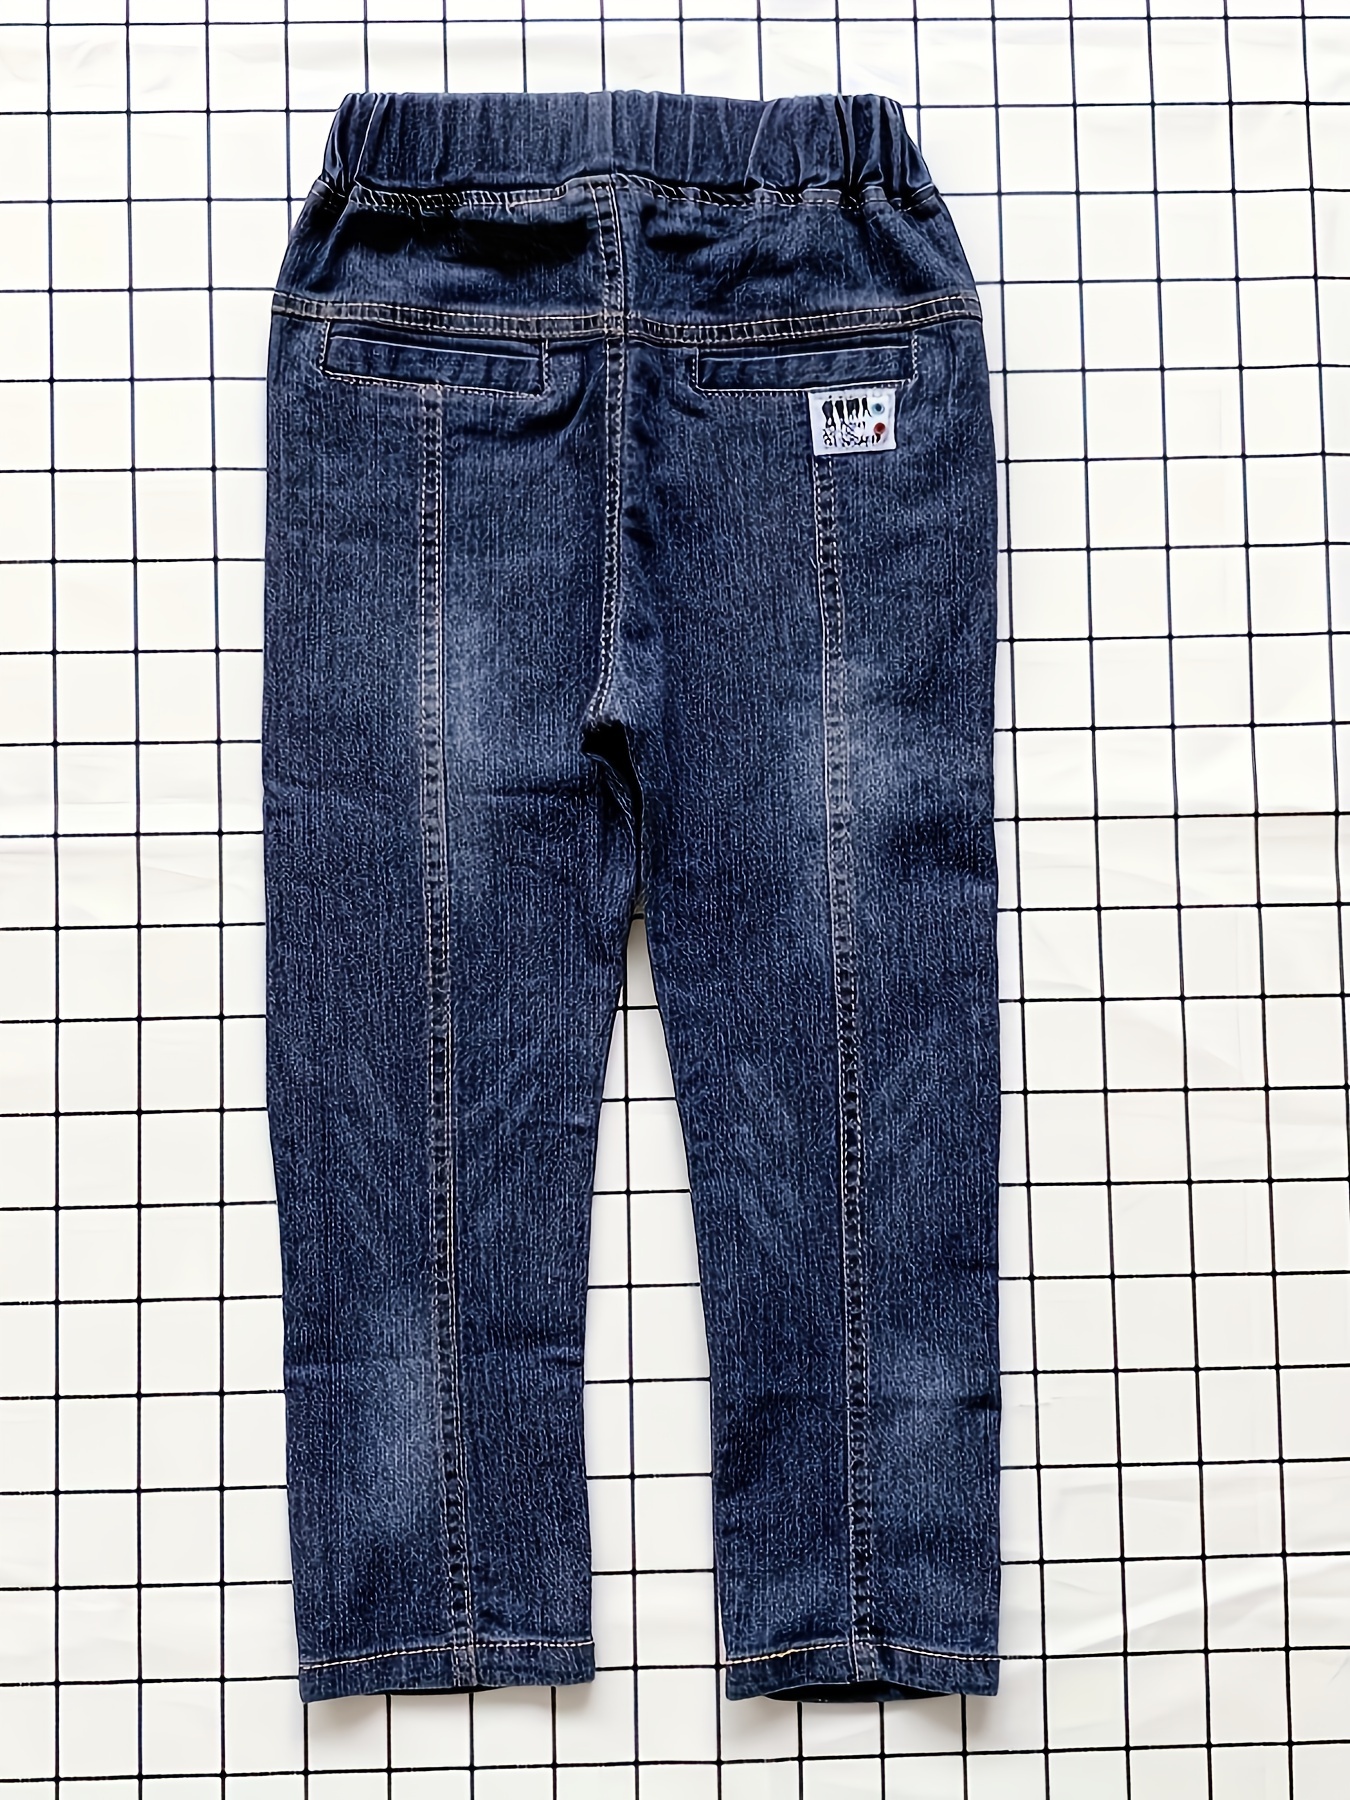 Boys Jeans Denim Pants For Spring And Autumn Kids Clothes